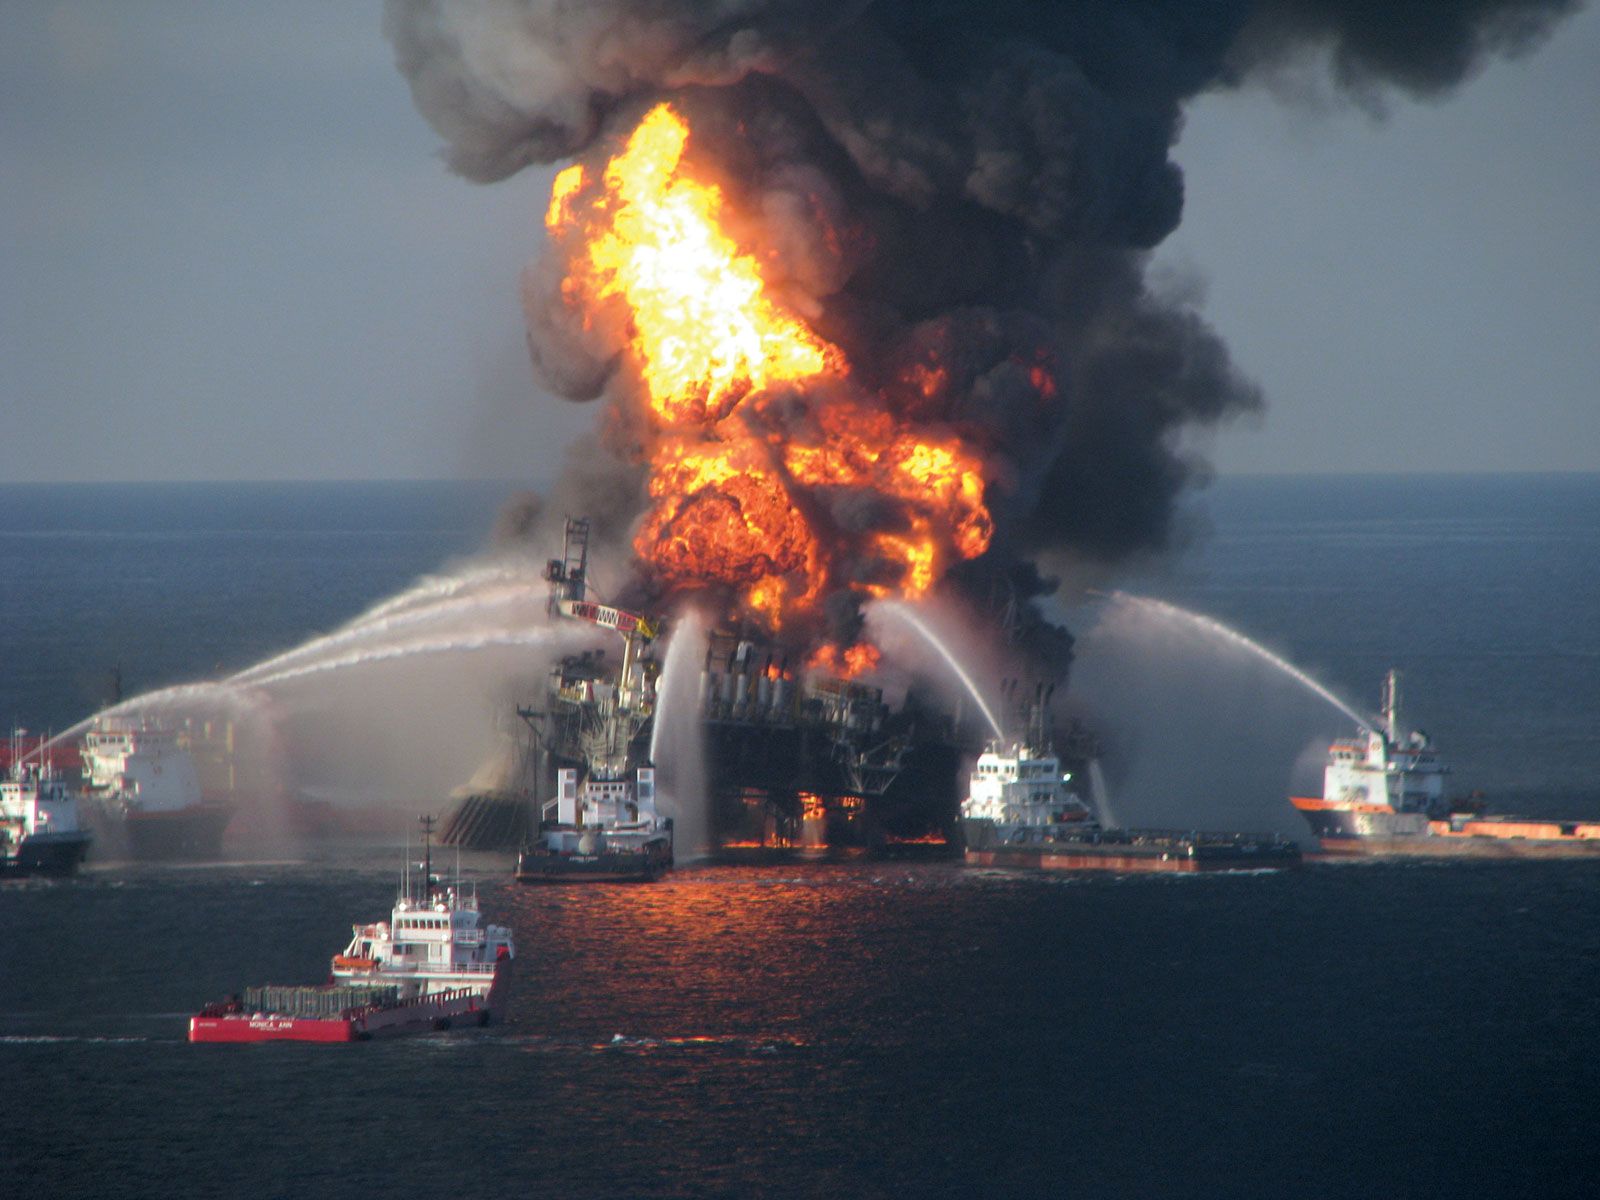 Annotated diagram of Deepwater Horizon drilling rig highlighting technical failures